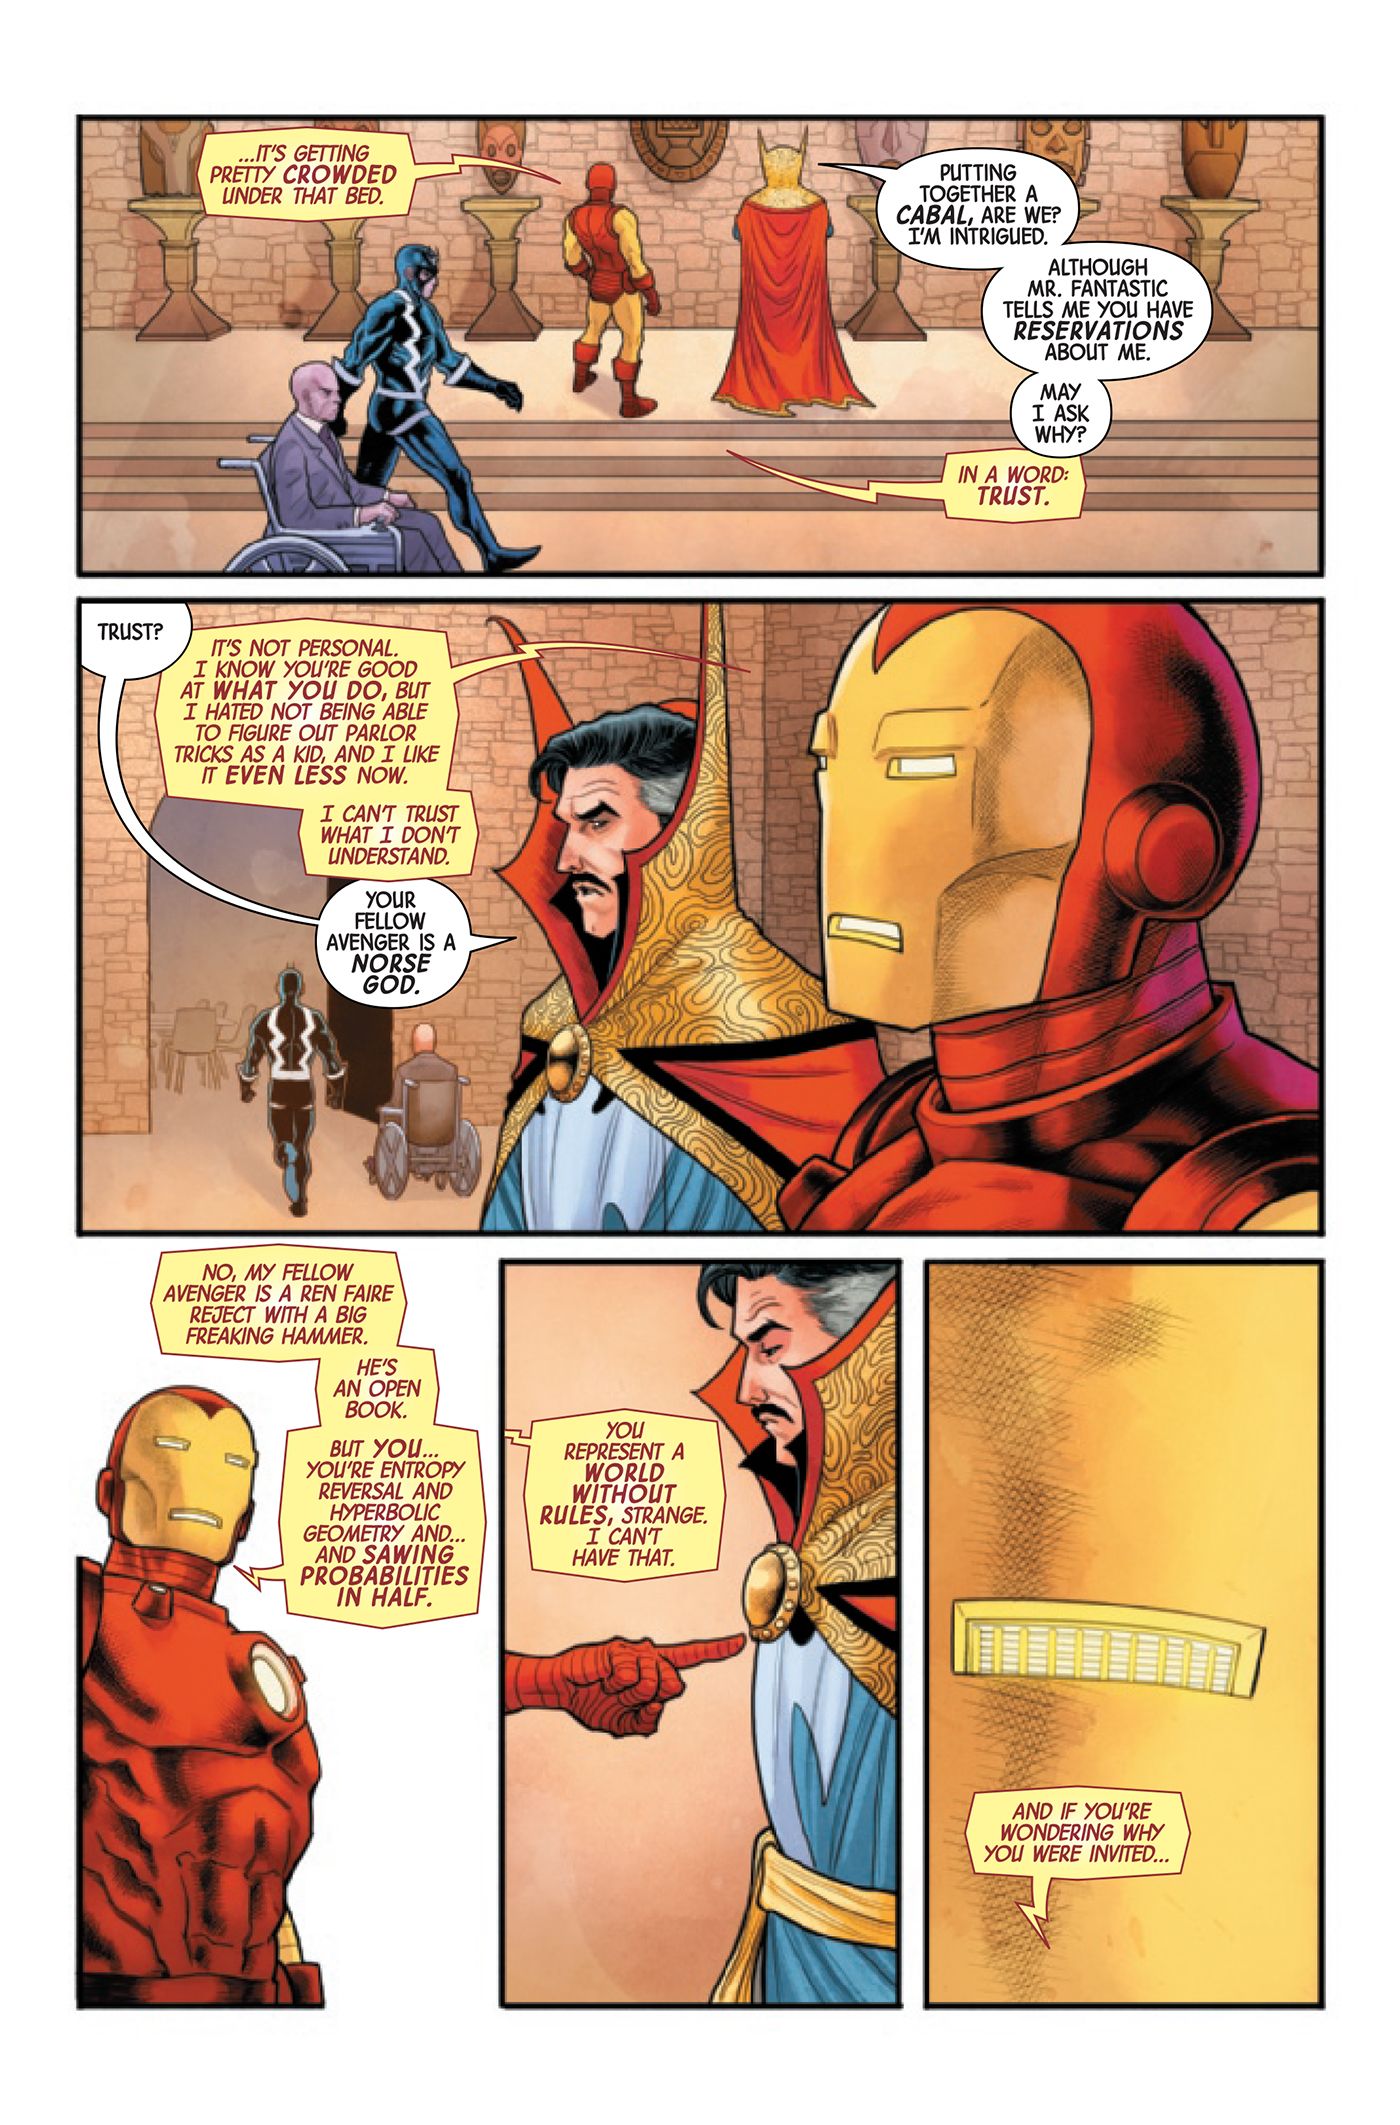 Iron Man discusses the non-personal reasons why he does not trust Doctor Strange.